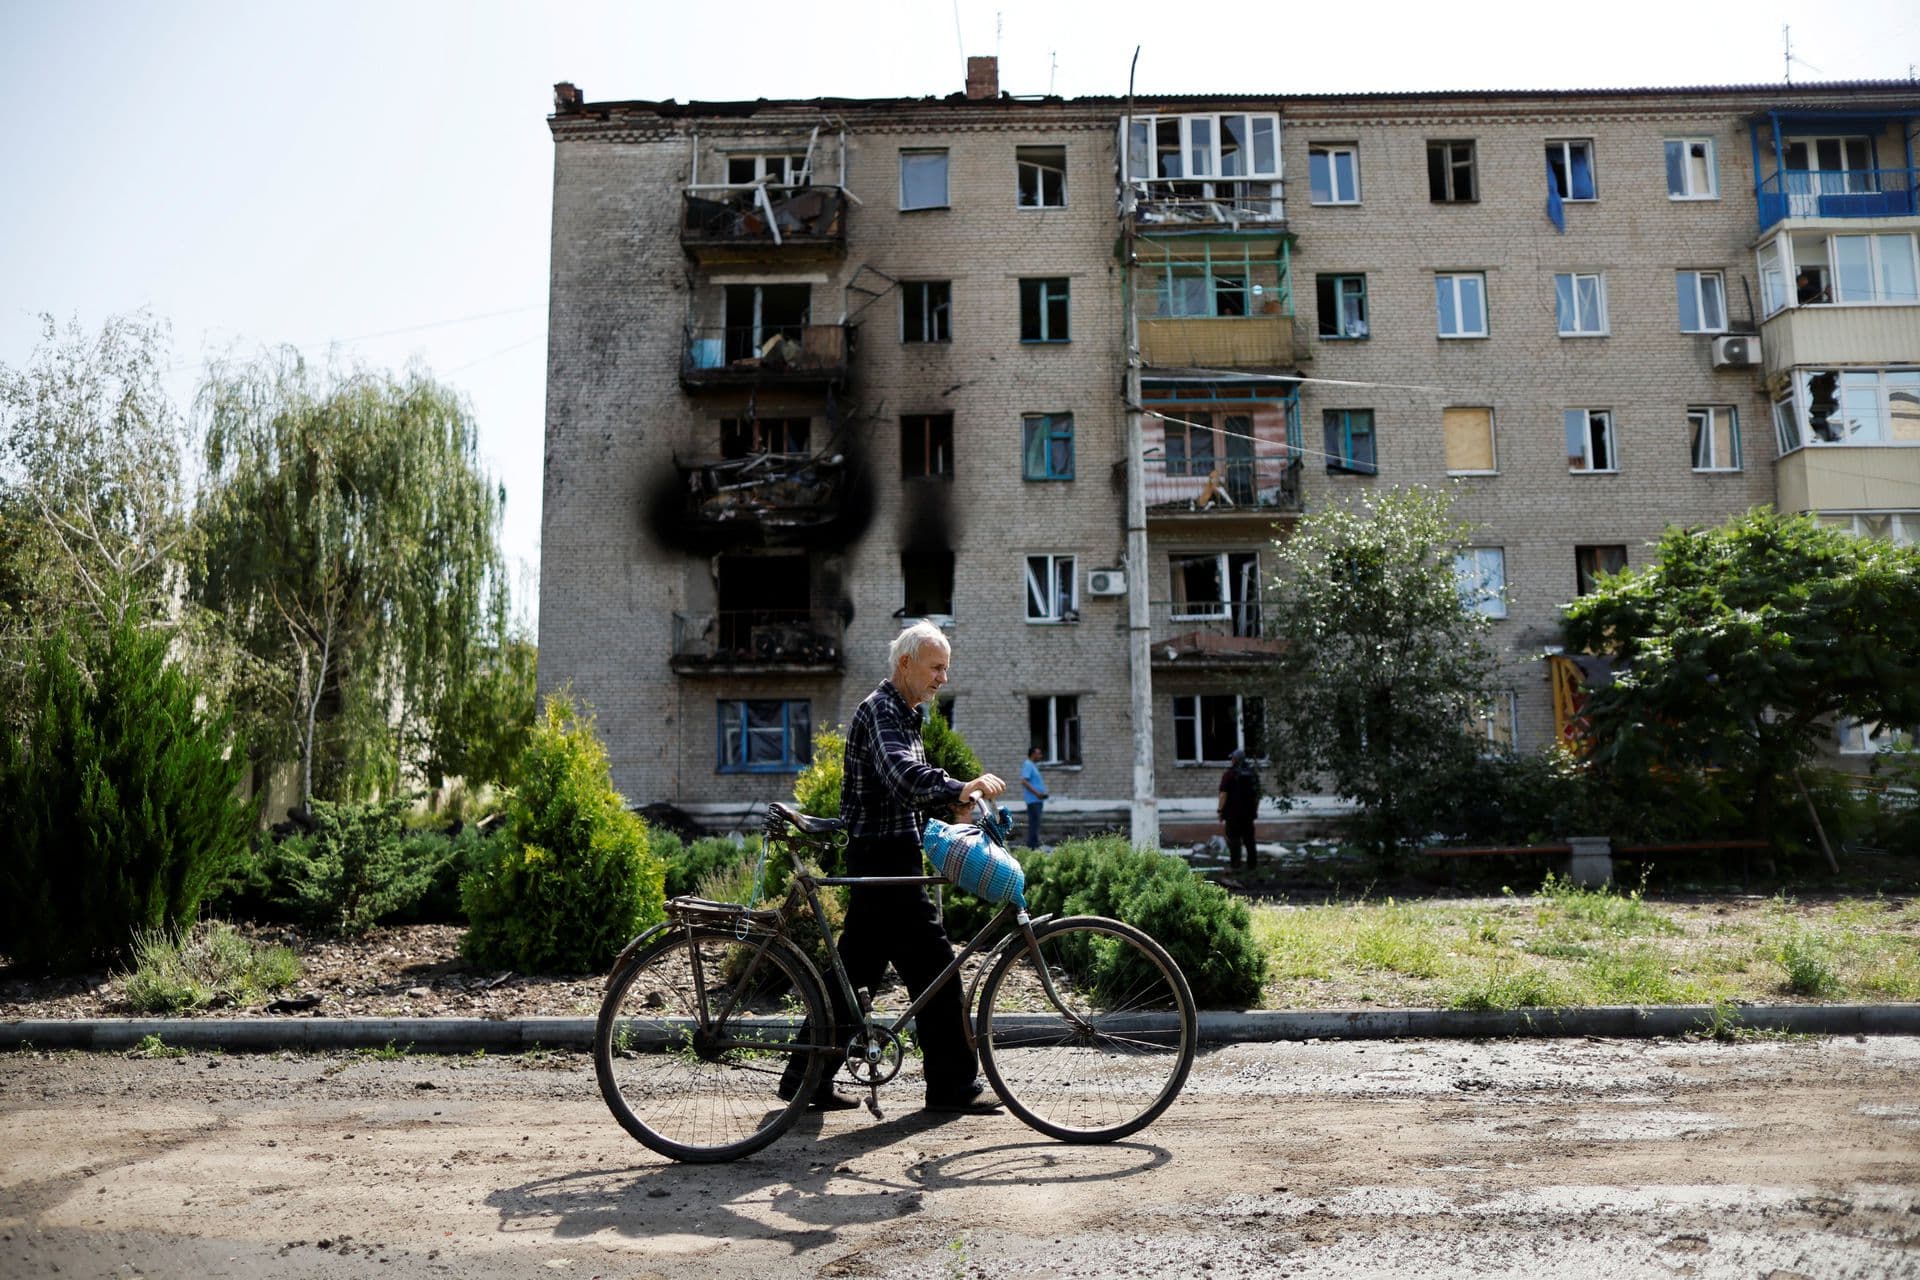 A Ukrainian man walks with his bicycle in front of damaged houses following recent Russian shelling in the city of Sloviansk